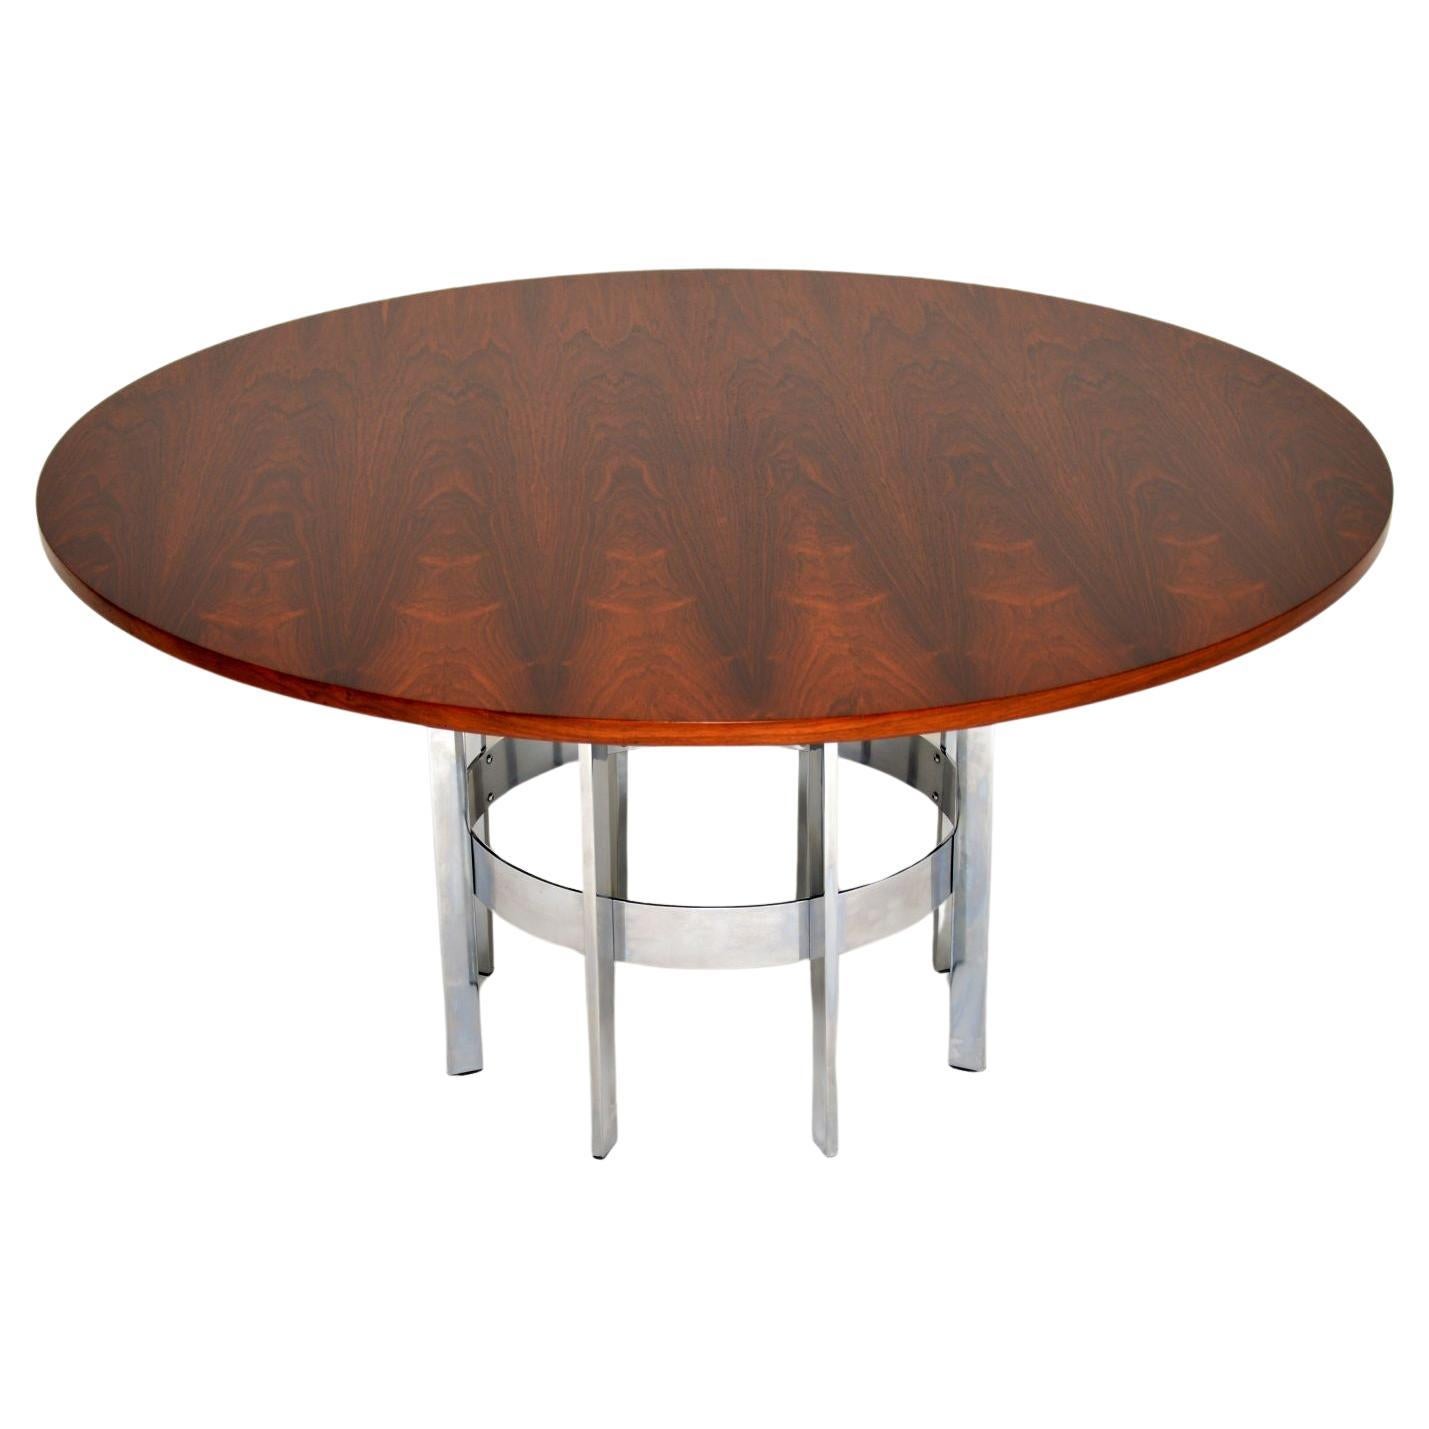 Vintage Dining Table by Merrow Associates